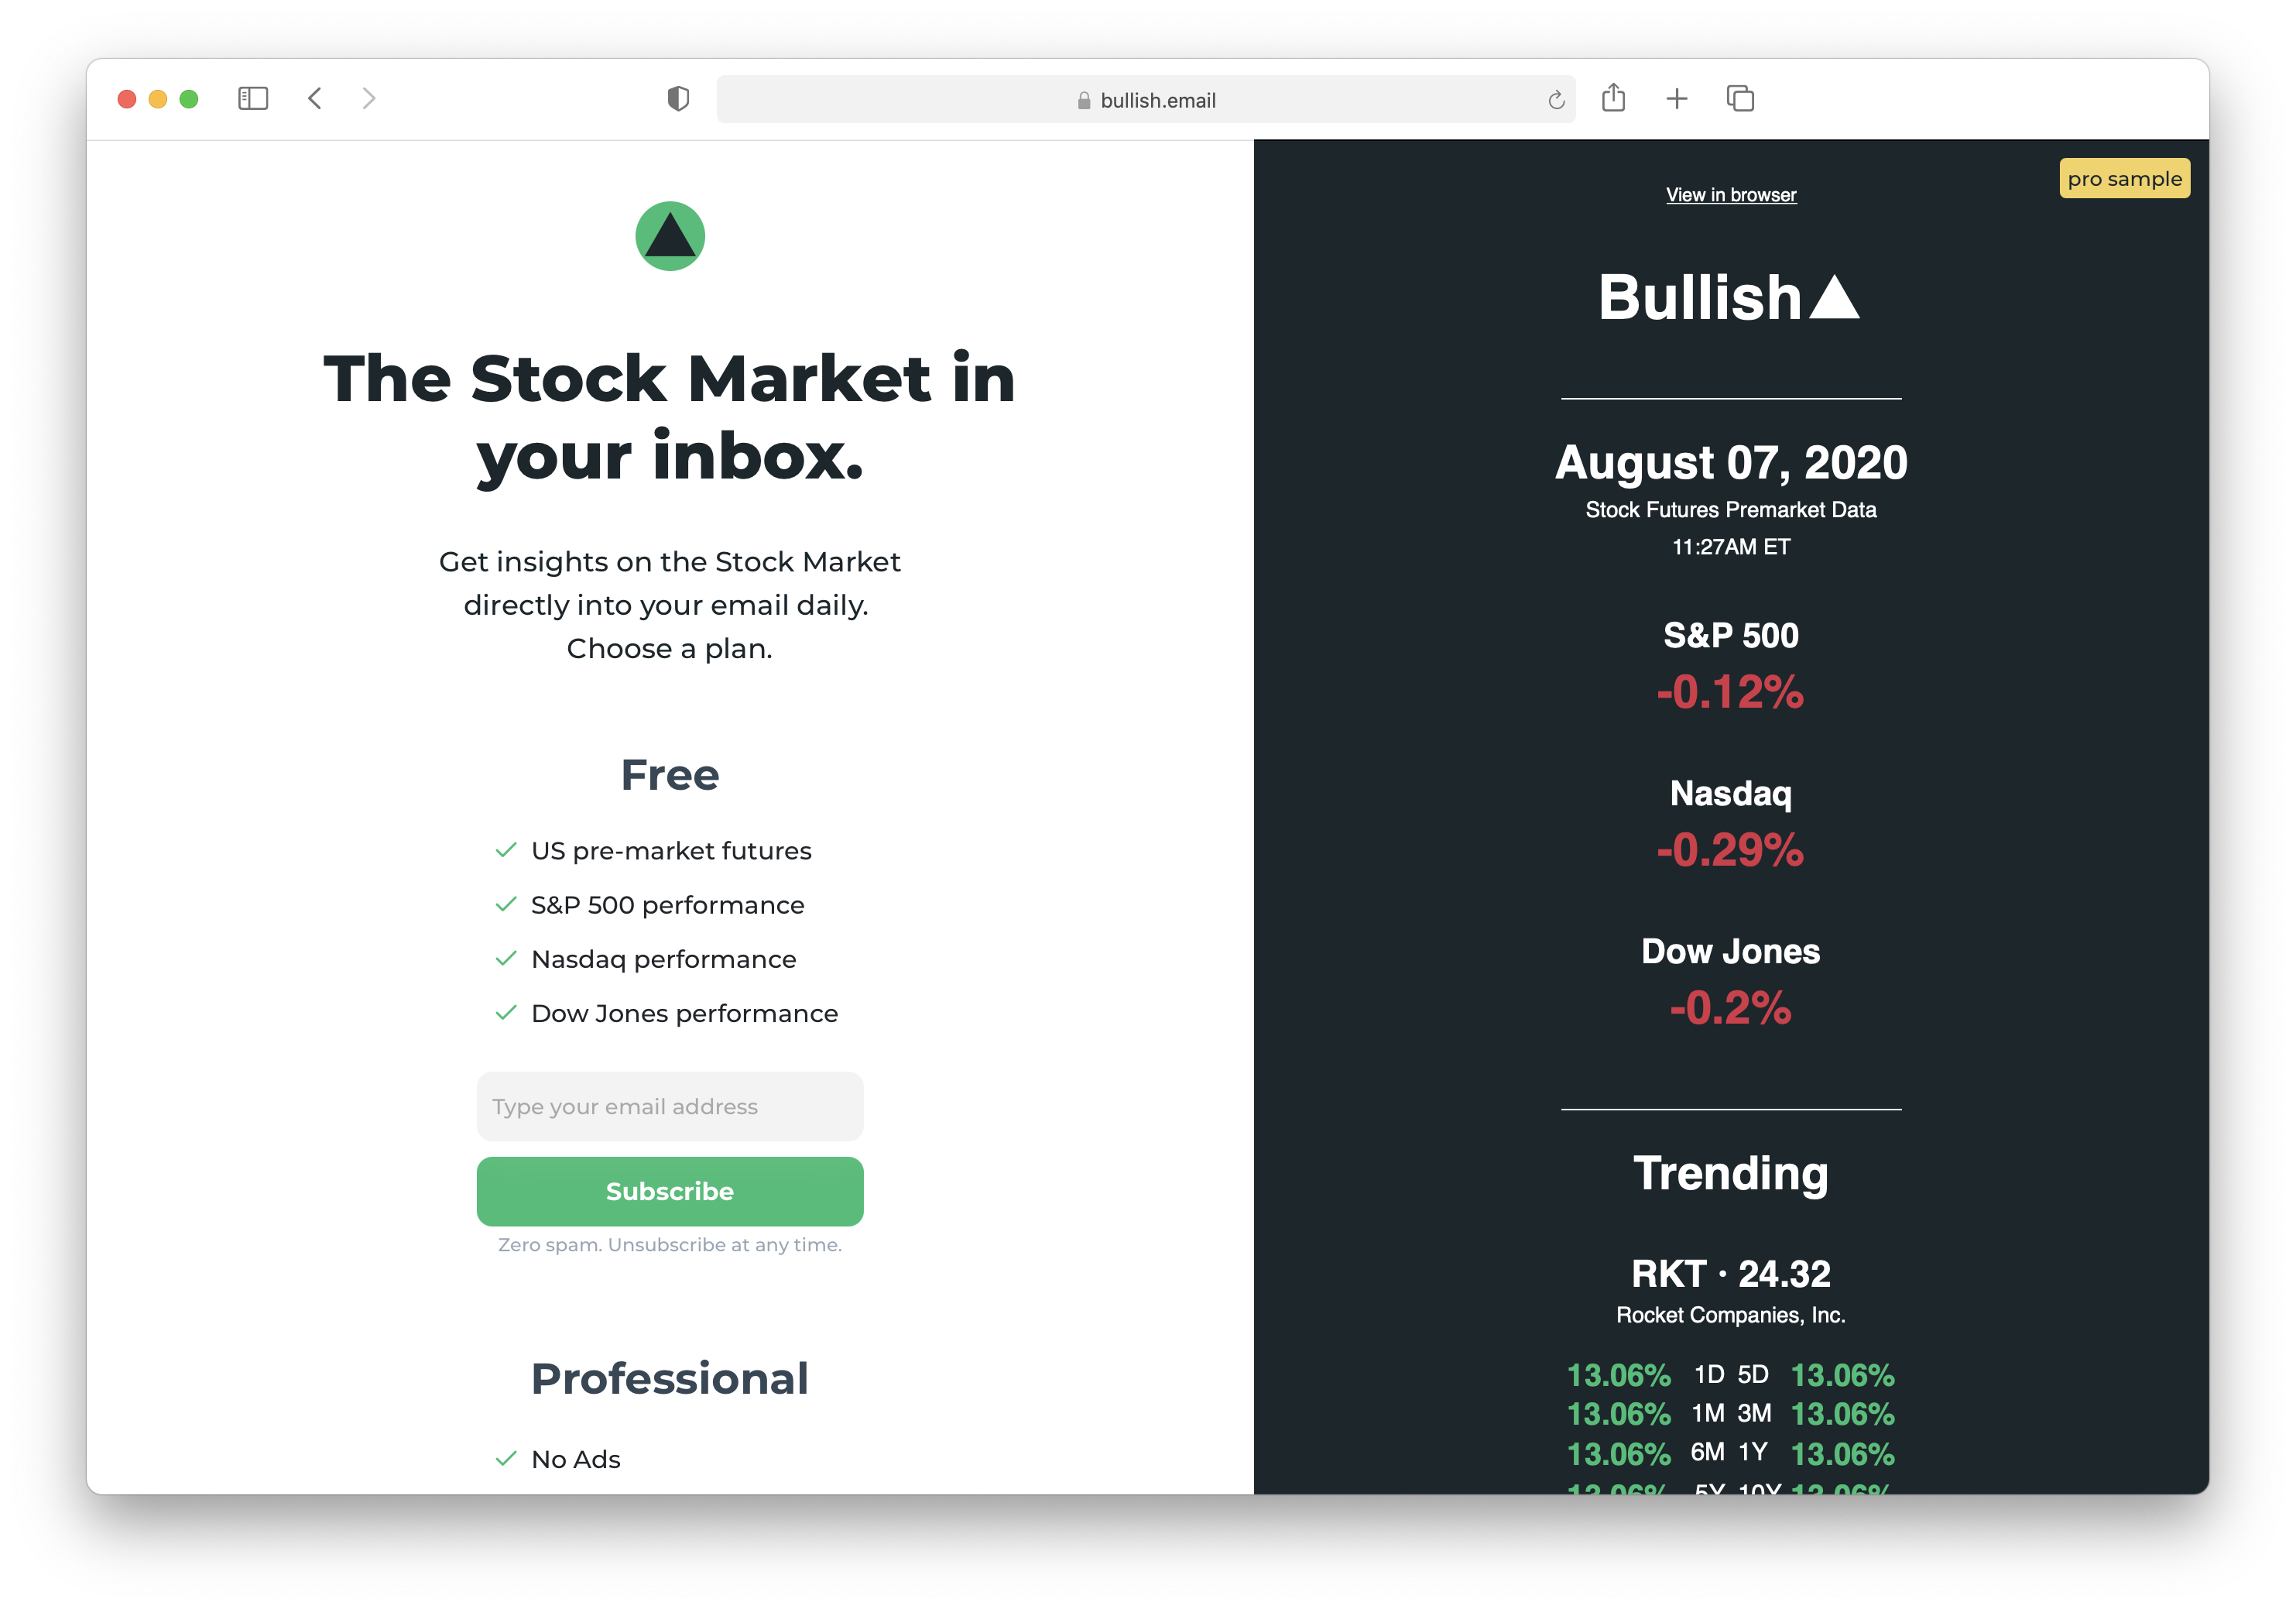 Bullish, a Stock Market Newsletter & Awesome Side Project